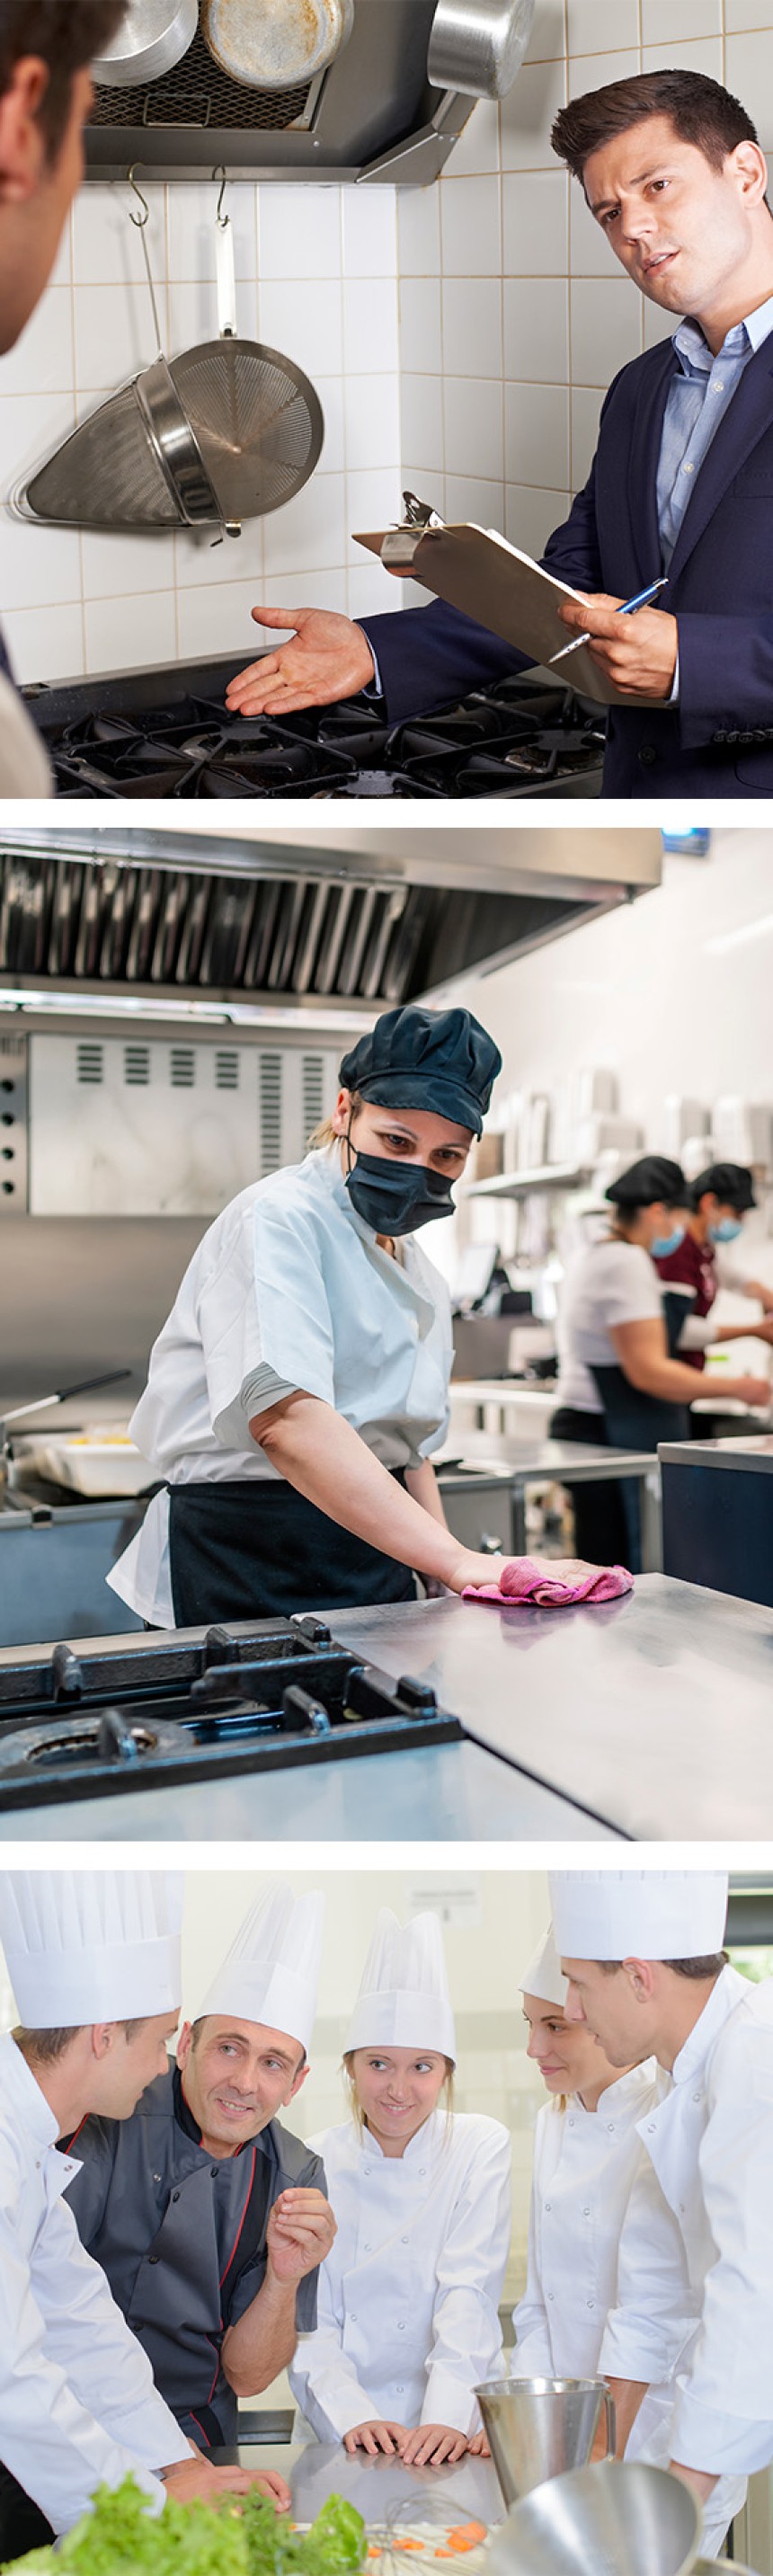 One of the biggest investments in starting a food business is setting up a fully compliant commercial kitchen